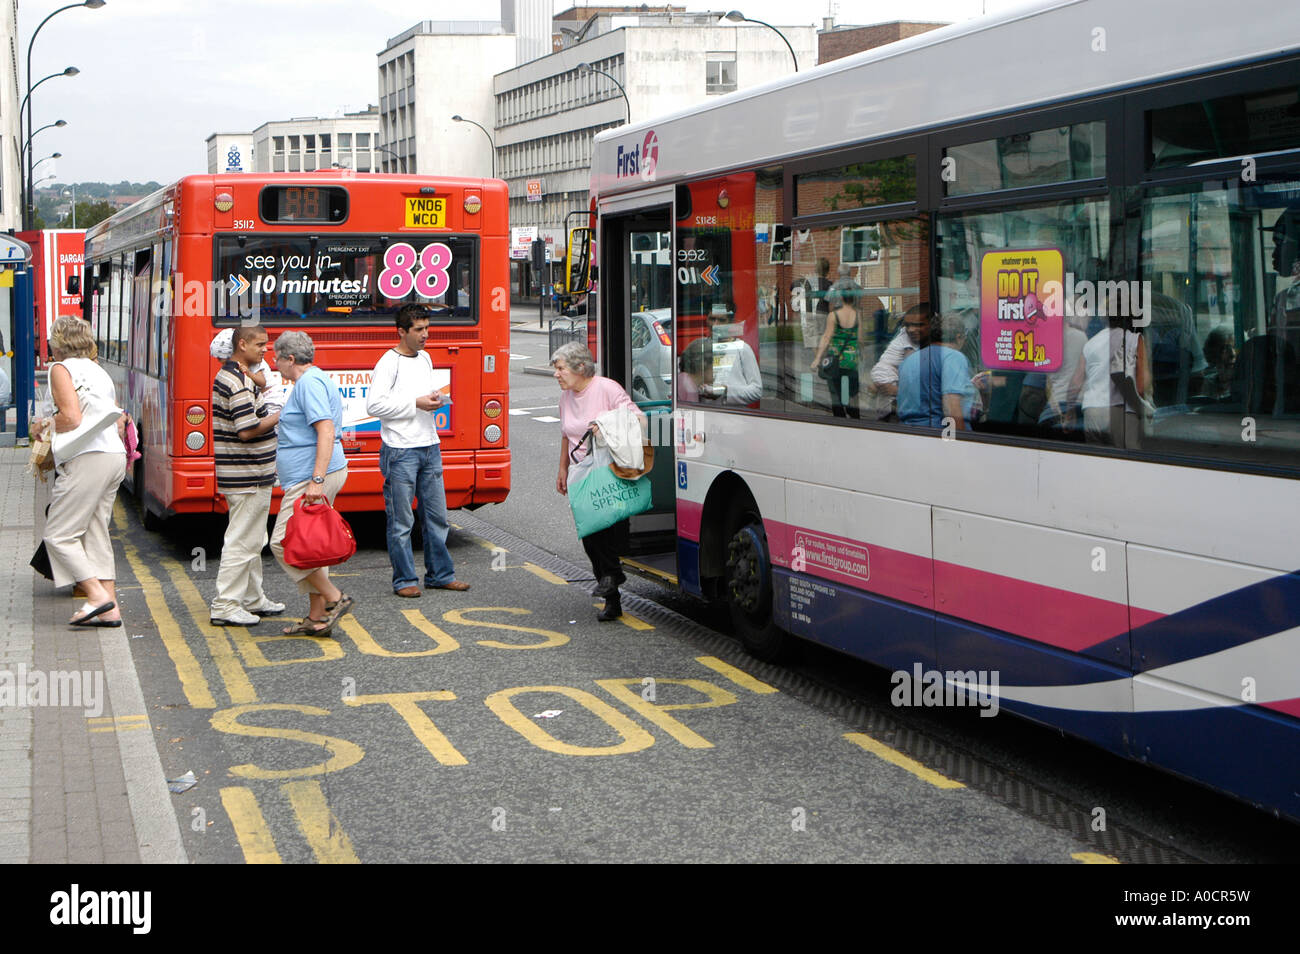 Passengers getting off a bus in Firstbus livery in Sheffield city centre. Stock Photo